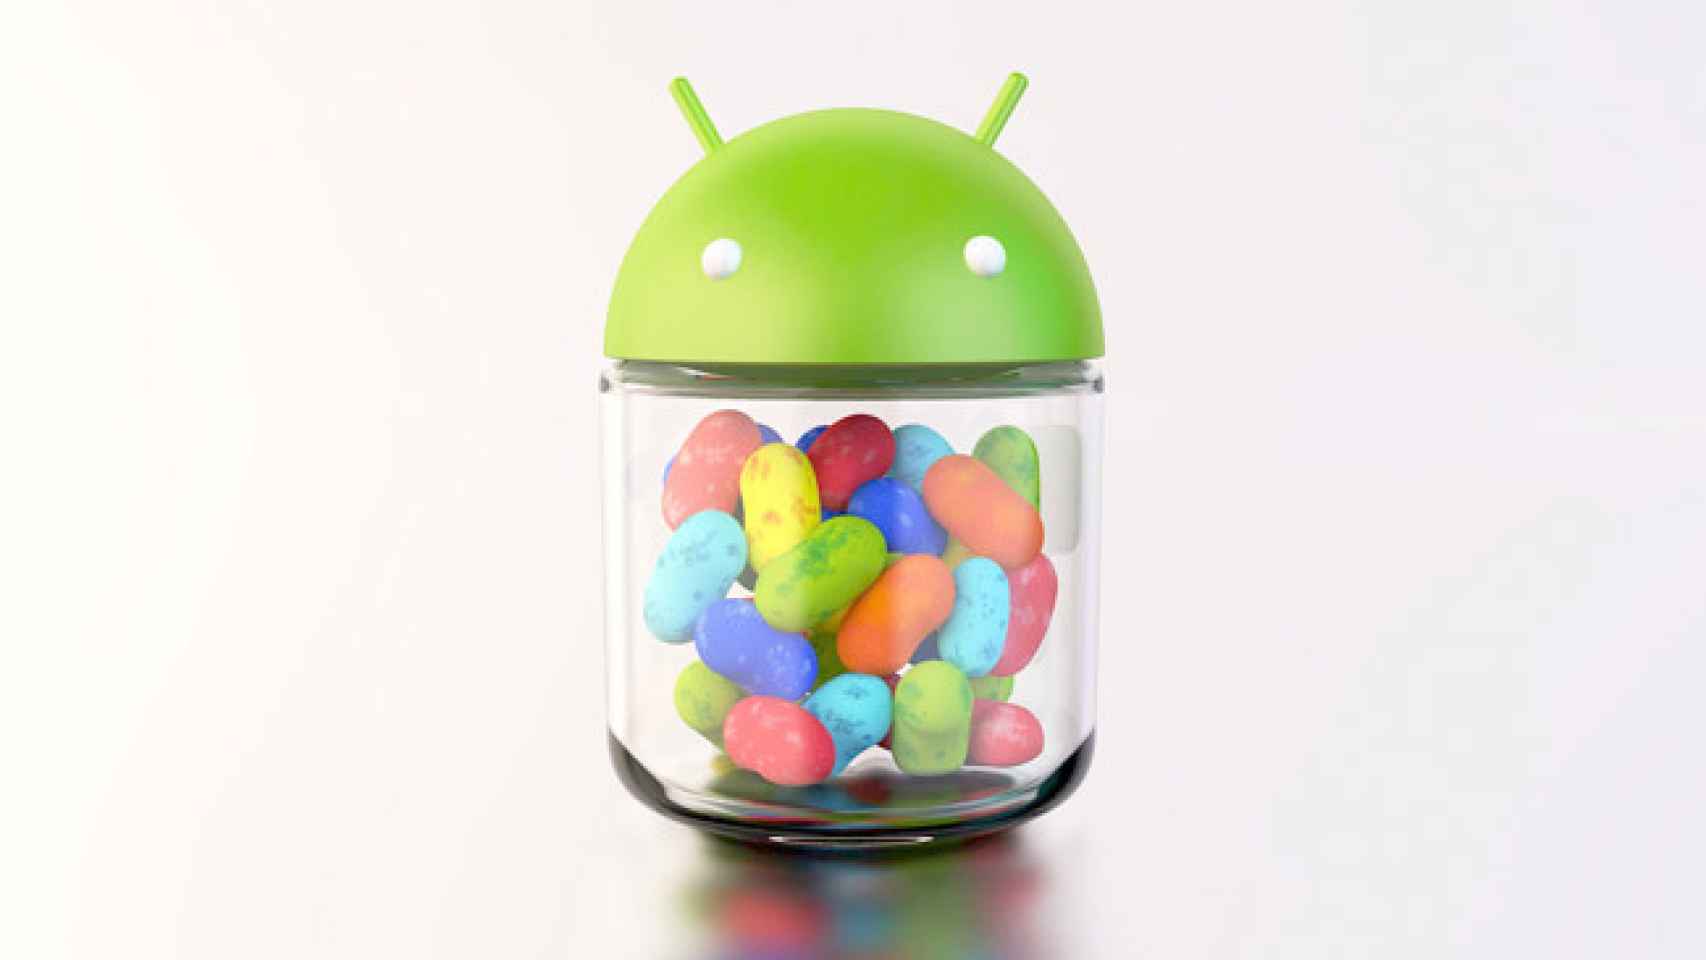 Google lanza Android 4.1.2 Jelly Bean